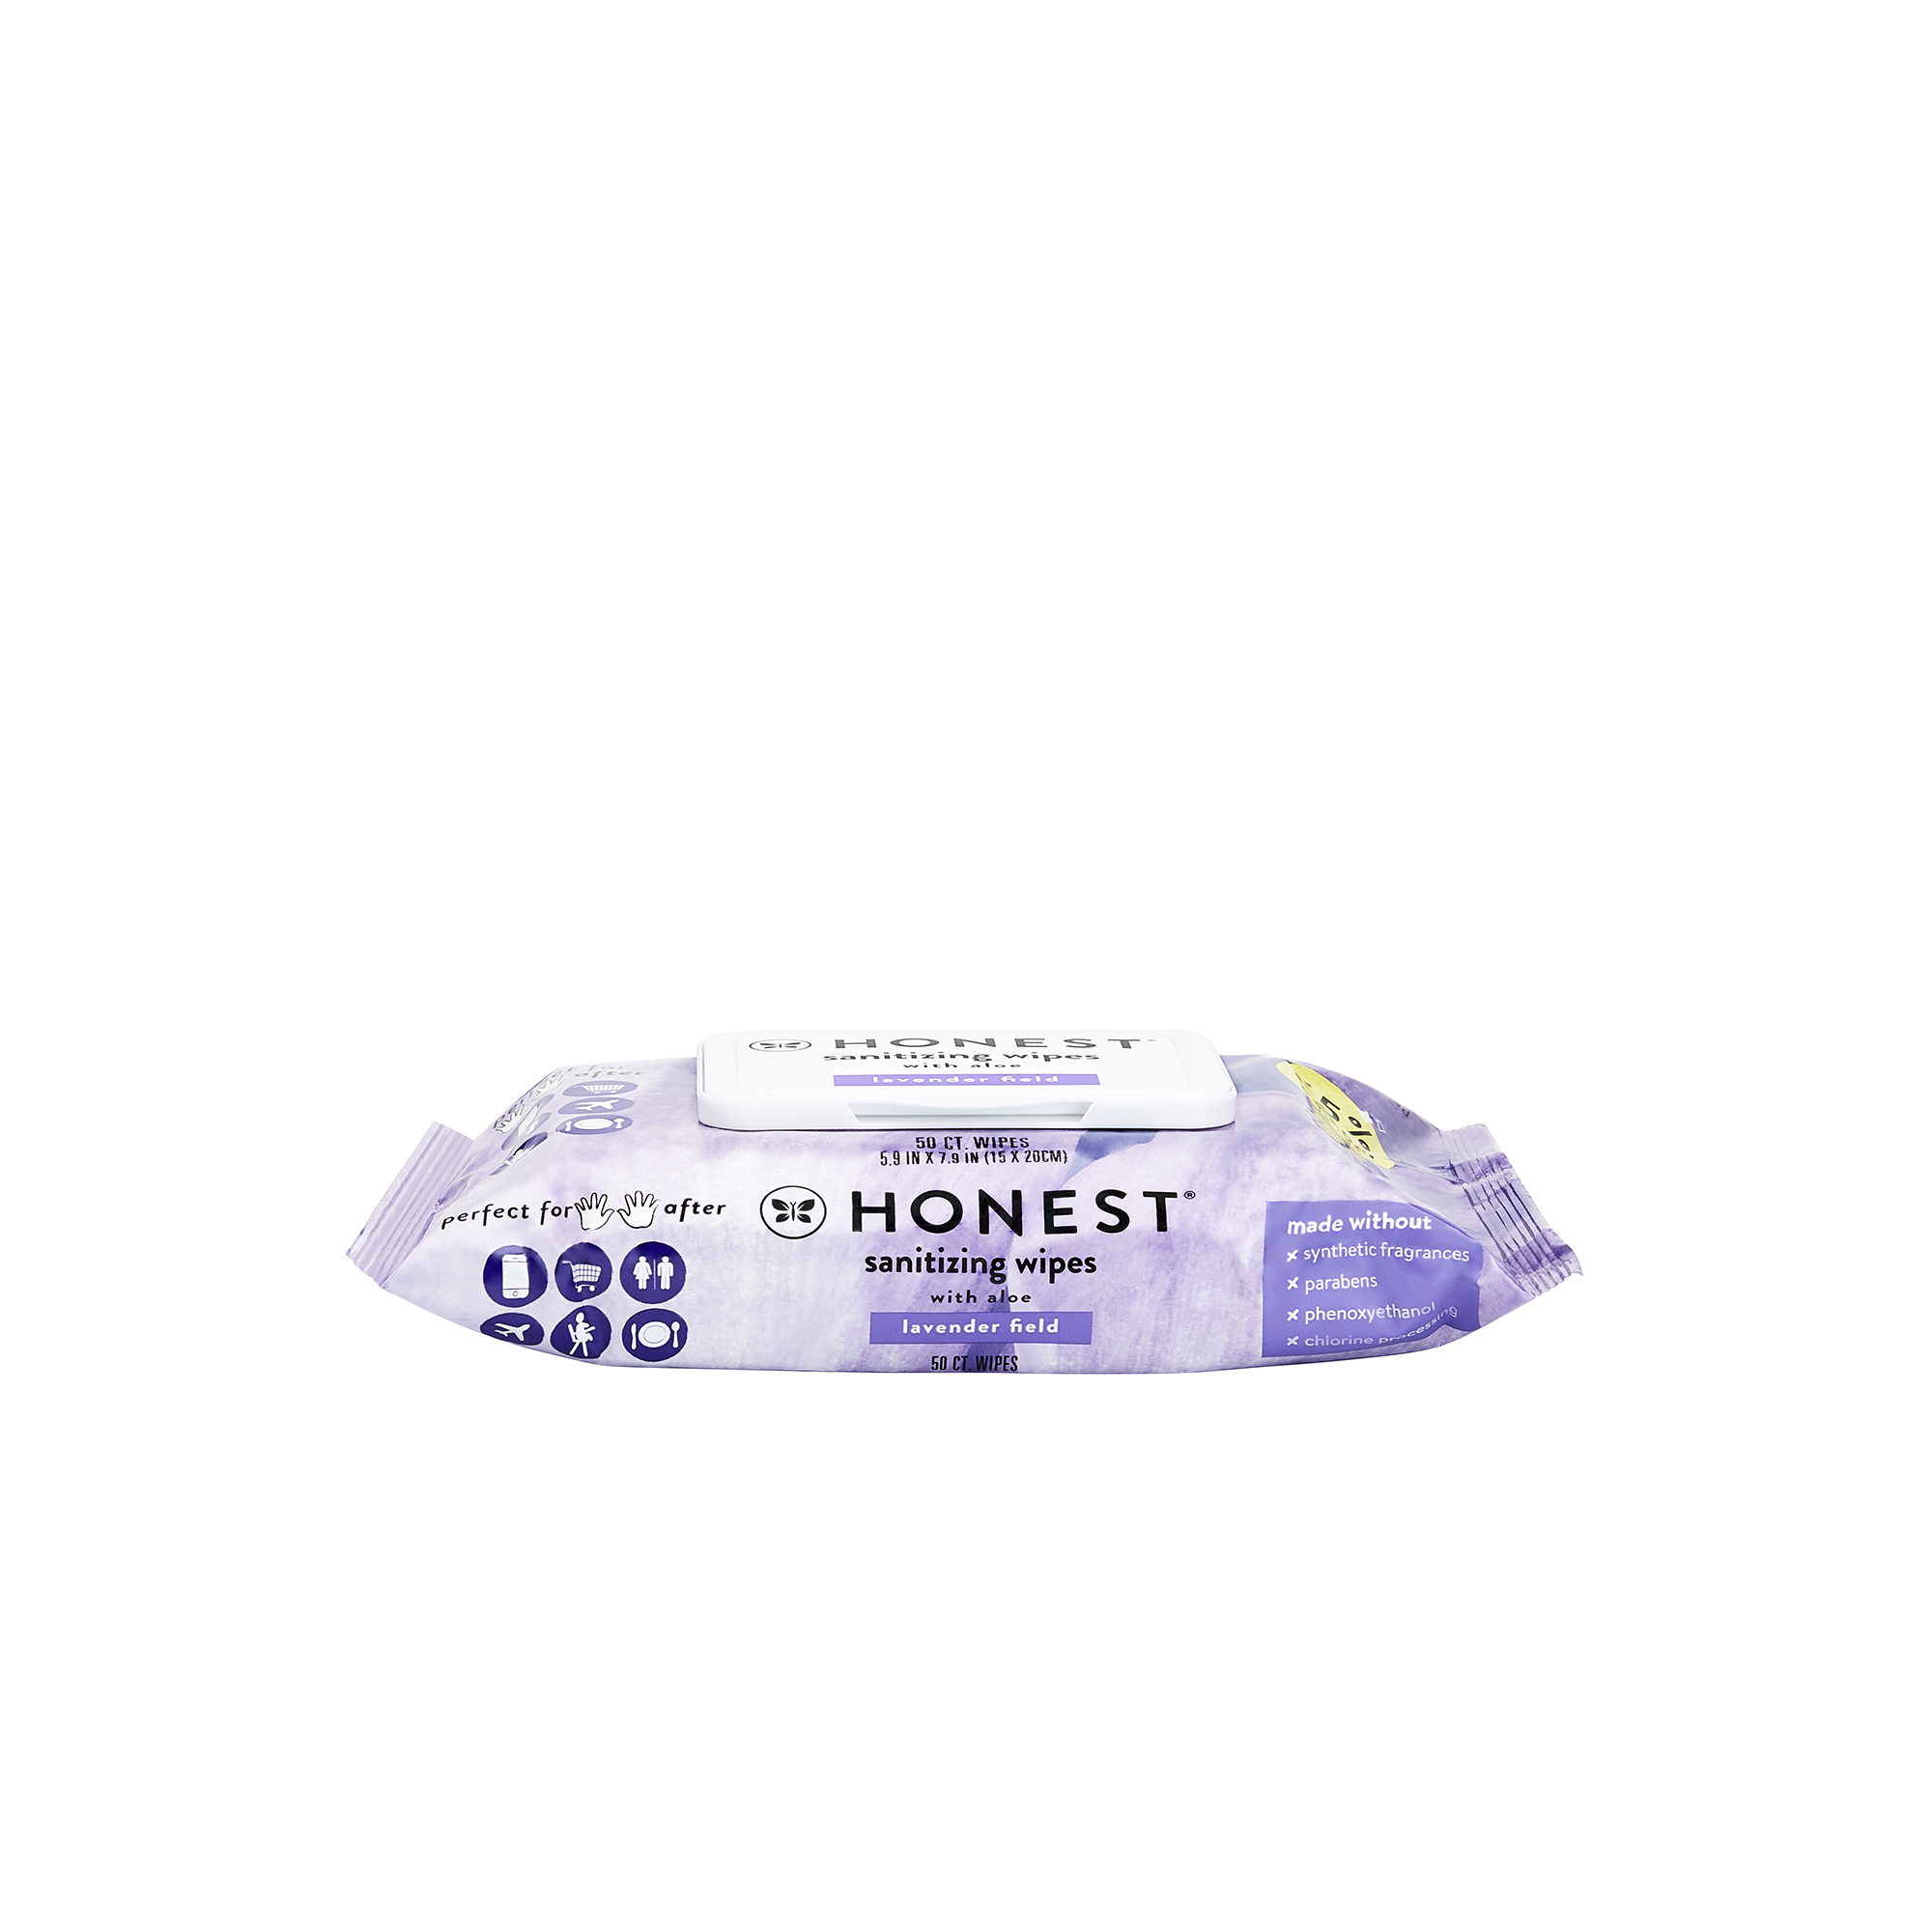 Honest Sanitizing Alcohol Baby Wipes, 50 Count, Lavender Field